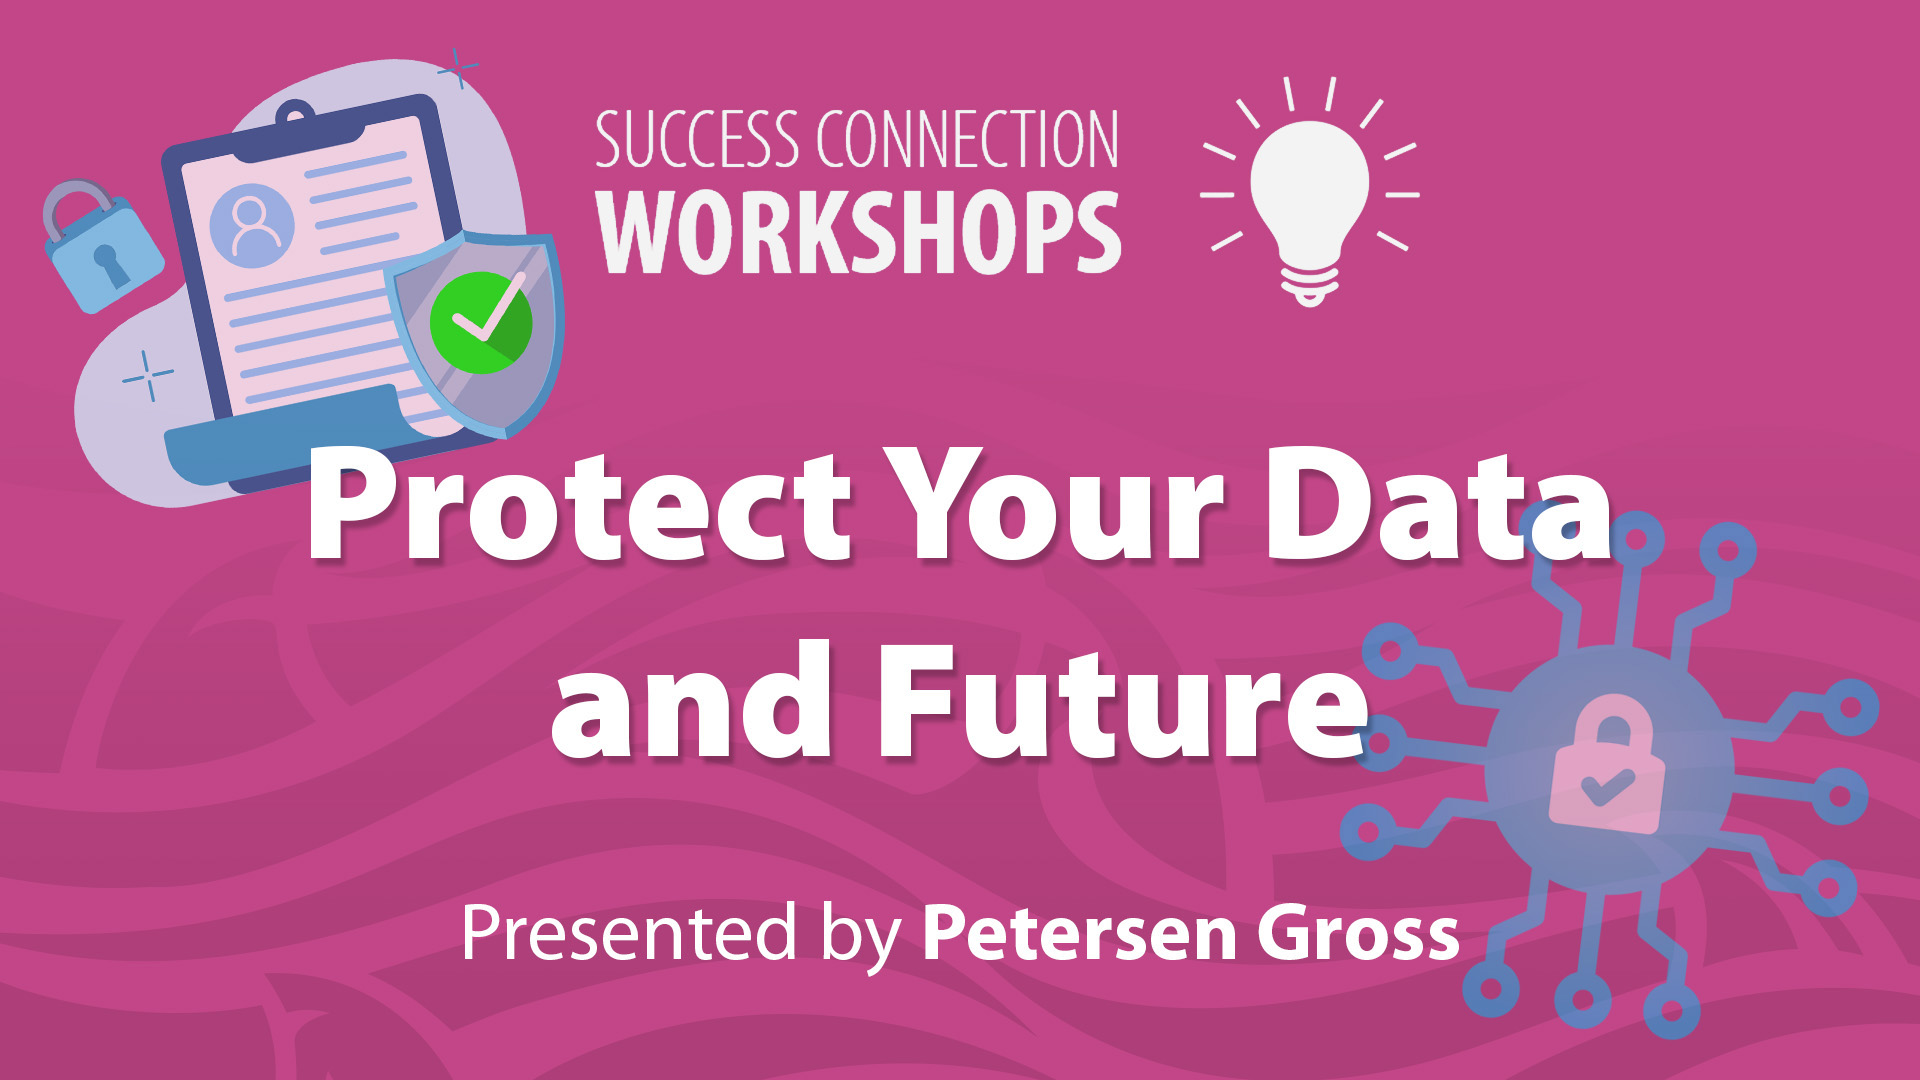 Success Connection Workshops Protect Your Data and Future